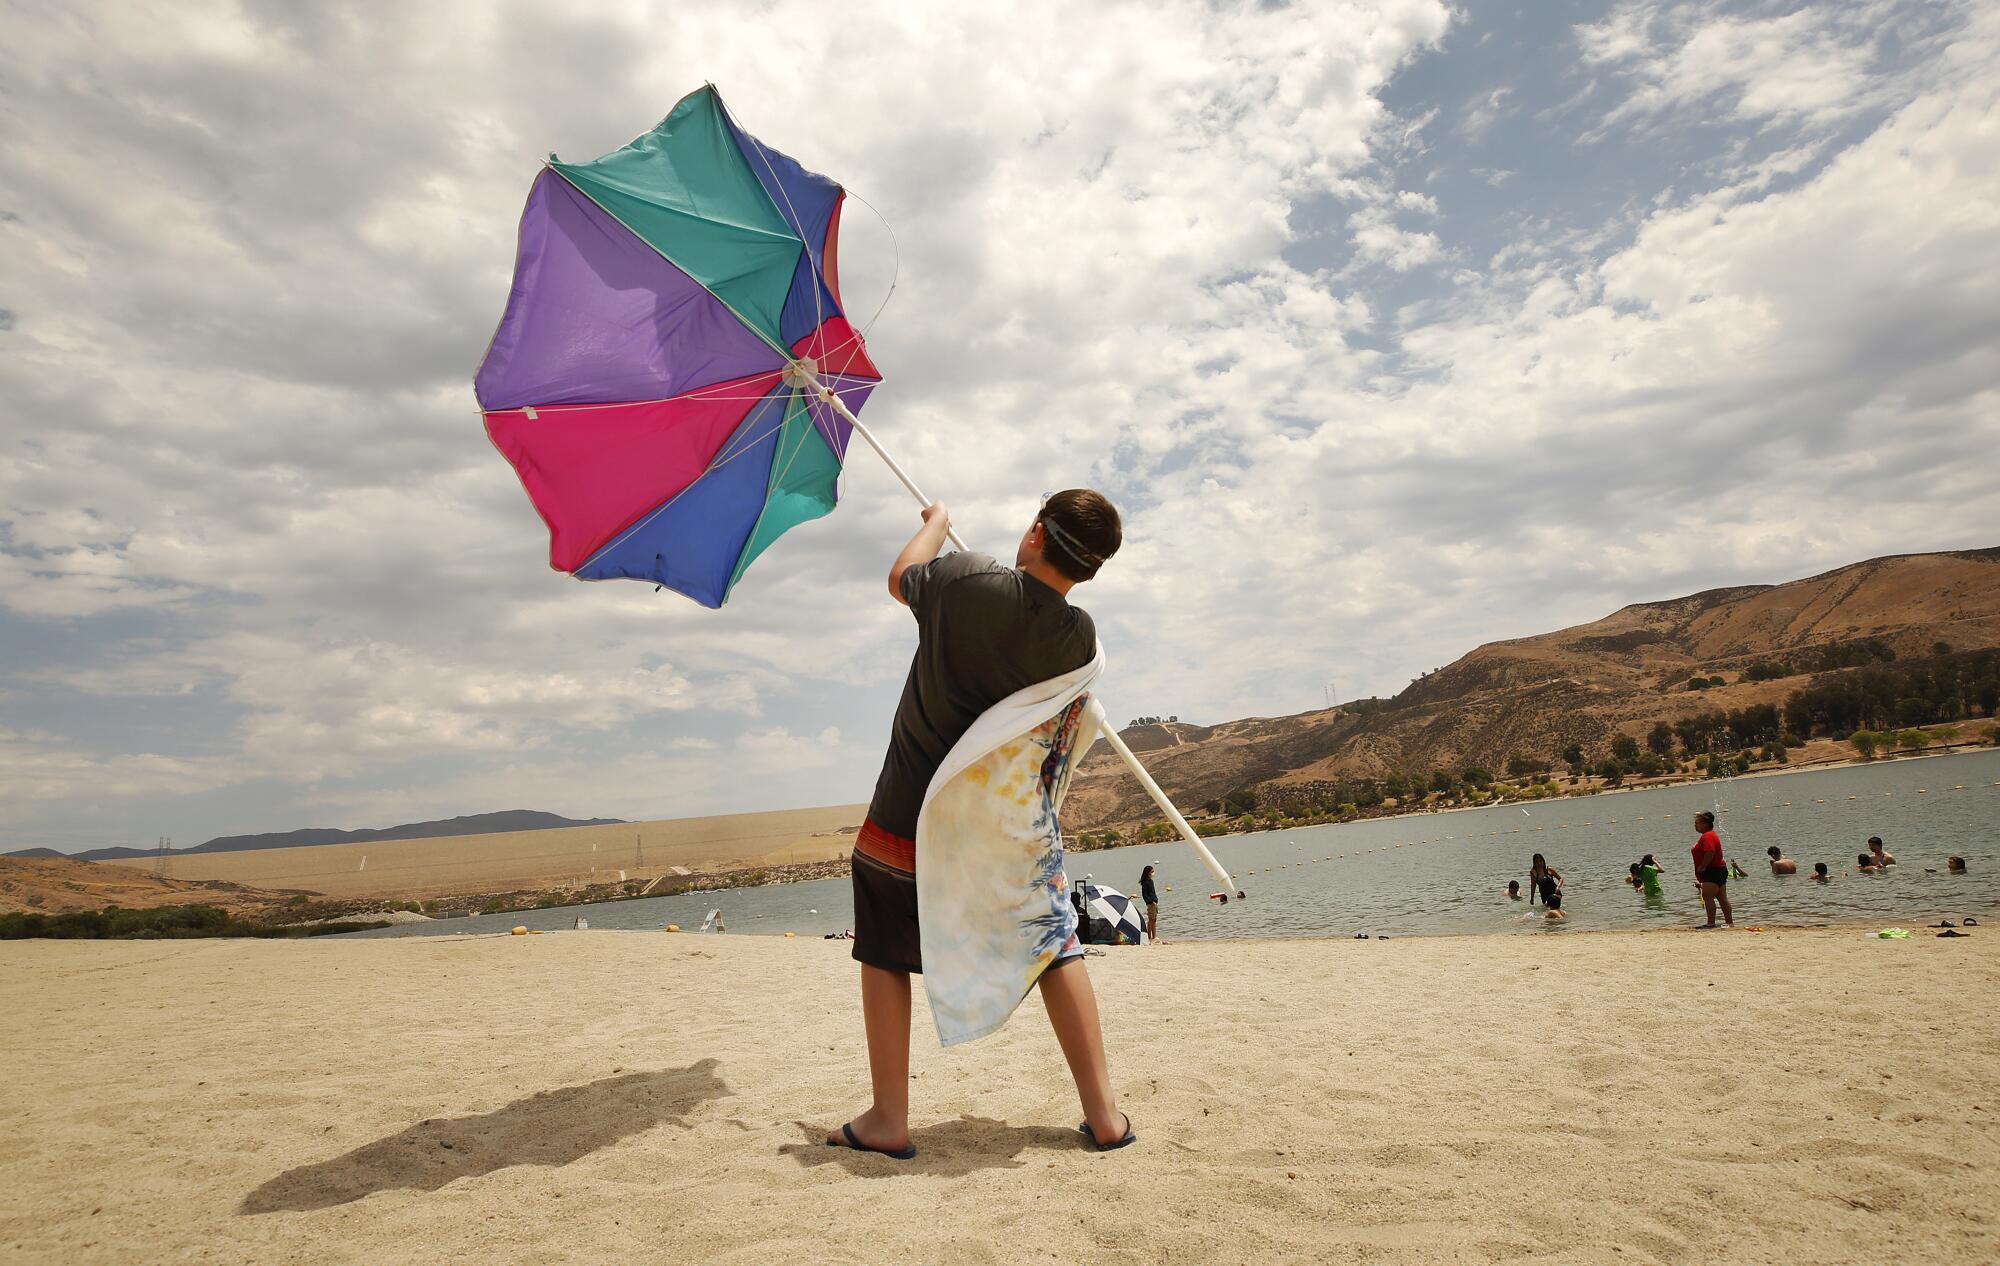 Zachary Pruett, 10, catches wind with his umbrella as he was putting it away at Castaic Lake Lagoon.